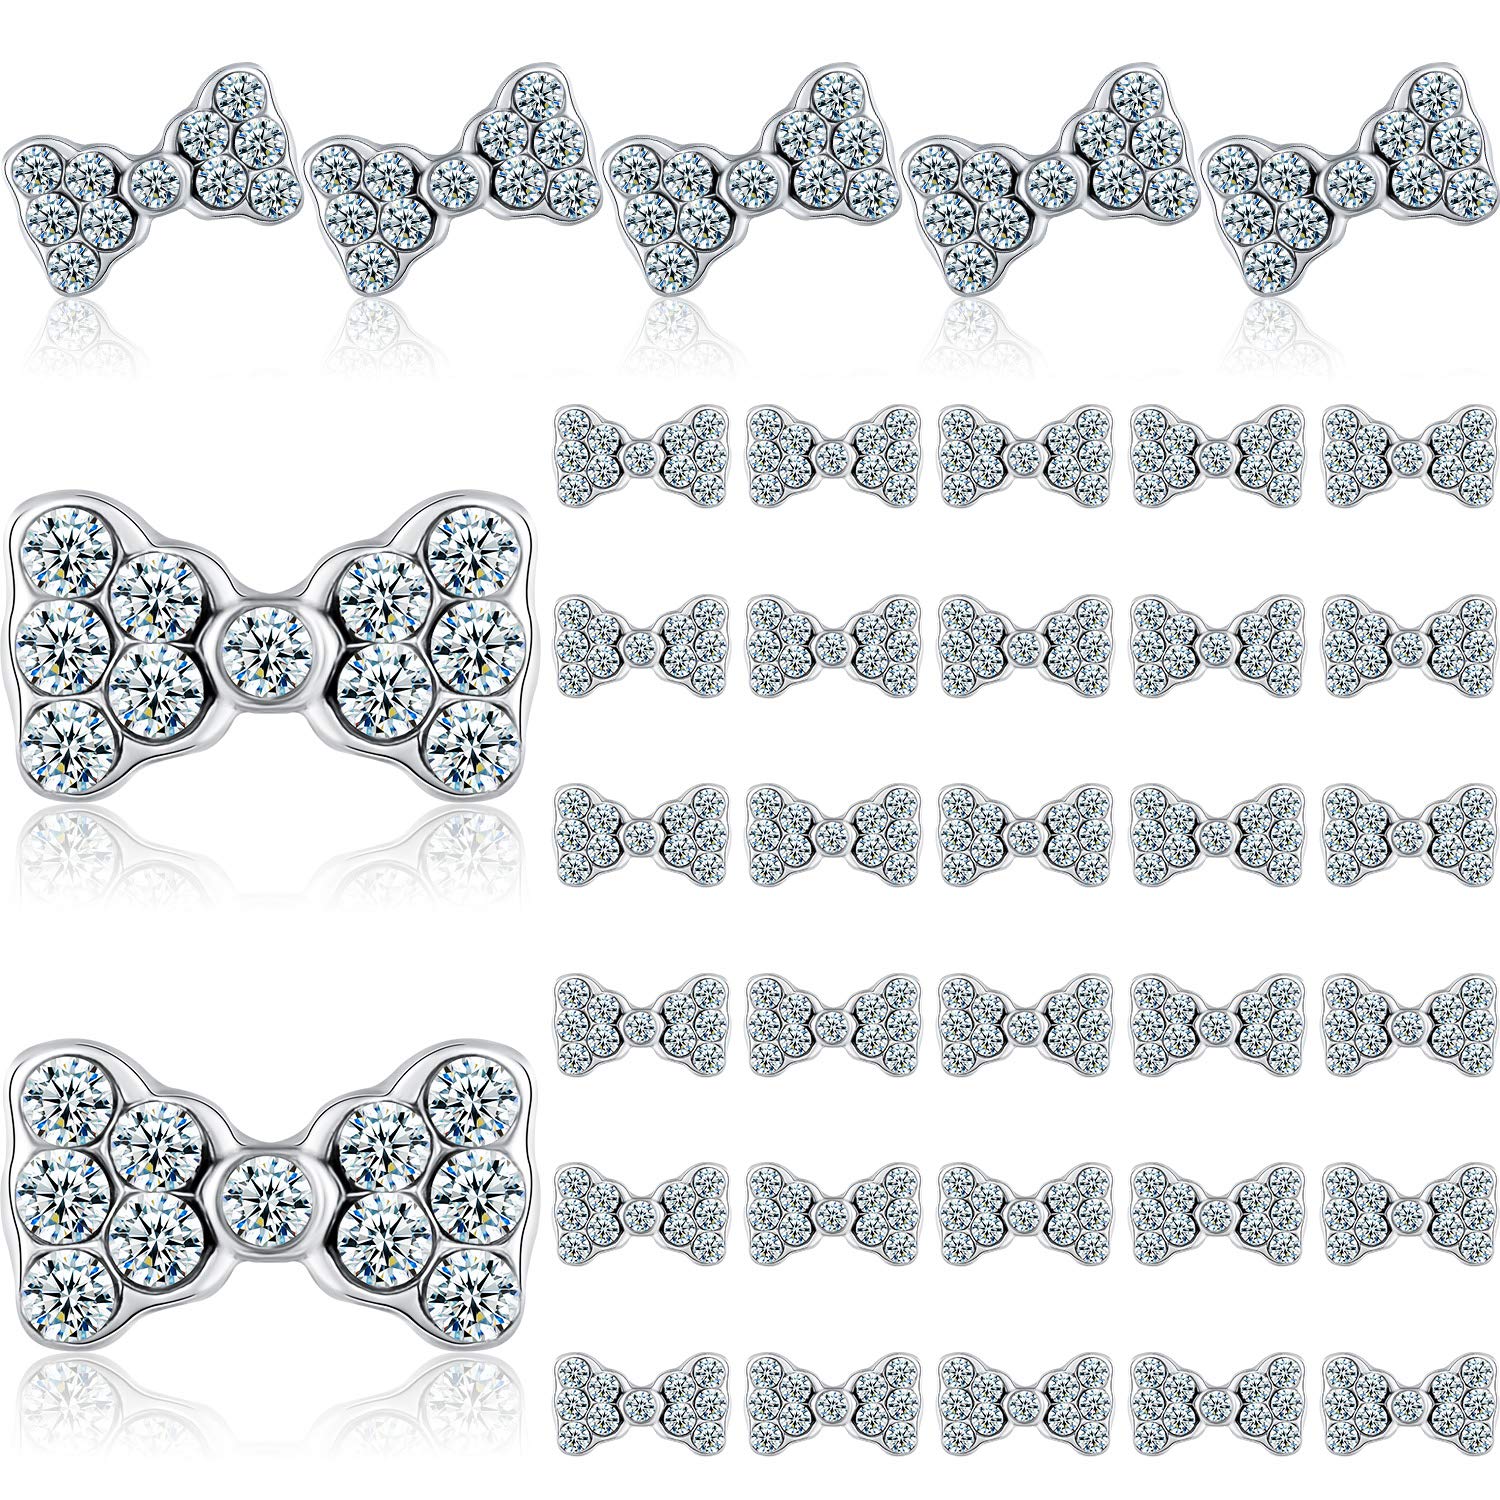 20pcs Mix Aurora Black White Checkerboard Knot Resin Nail Charm 3D Japanese  Bow Checker 8 Patterns For Nails Supply 6.5-12MM& - AliExpress